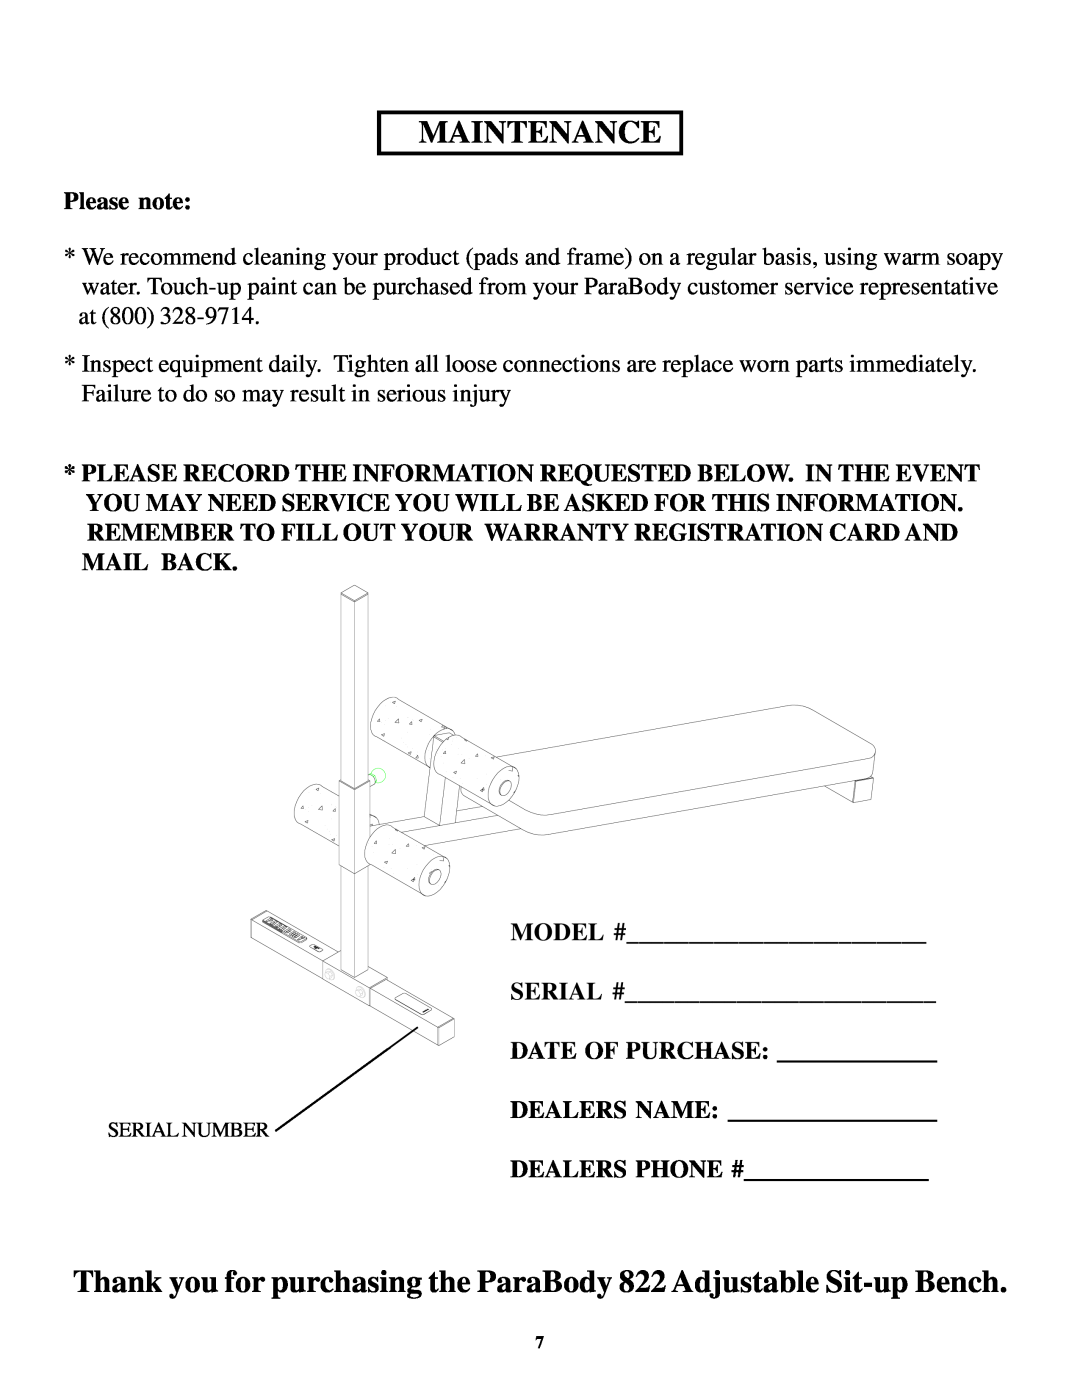 ParaBody manual Maintenance, Thank you for purchasing the ParaBody 822 Adjustable Sit-up Bench, Serial Number 